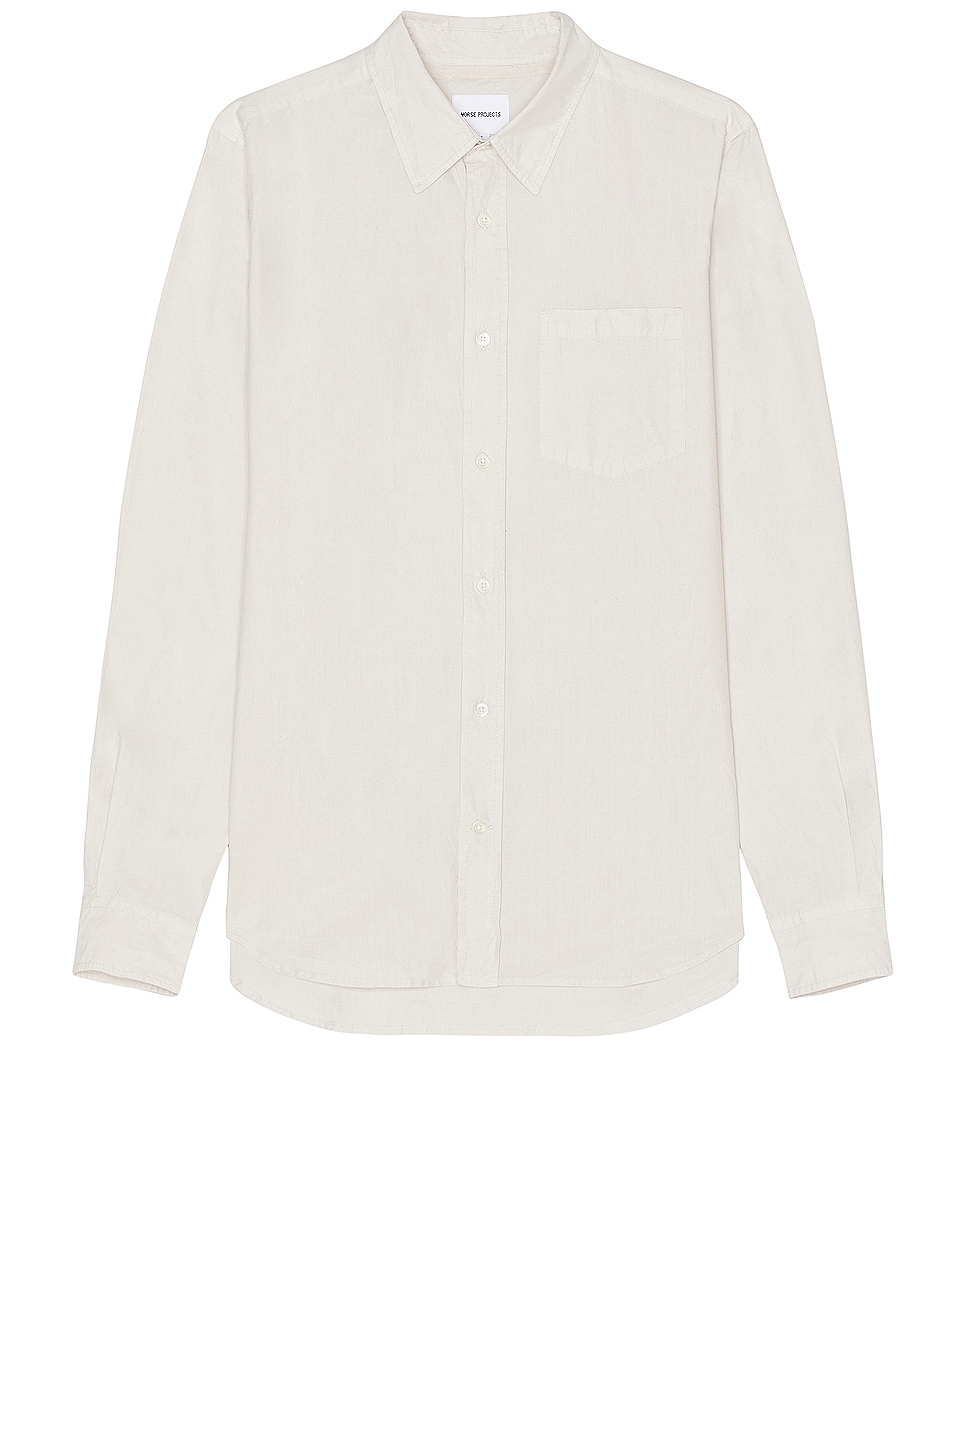 Image 1 of Norse Projects Osvald Cotton Tencel Shirt in Marble White